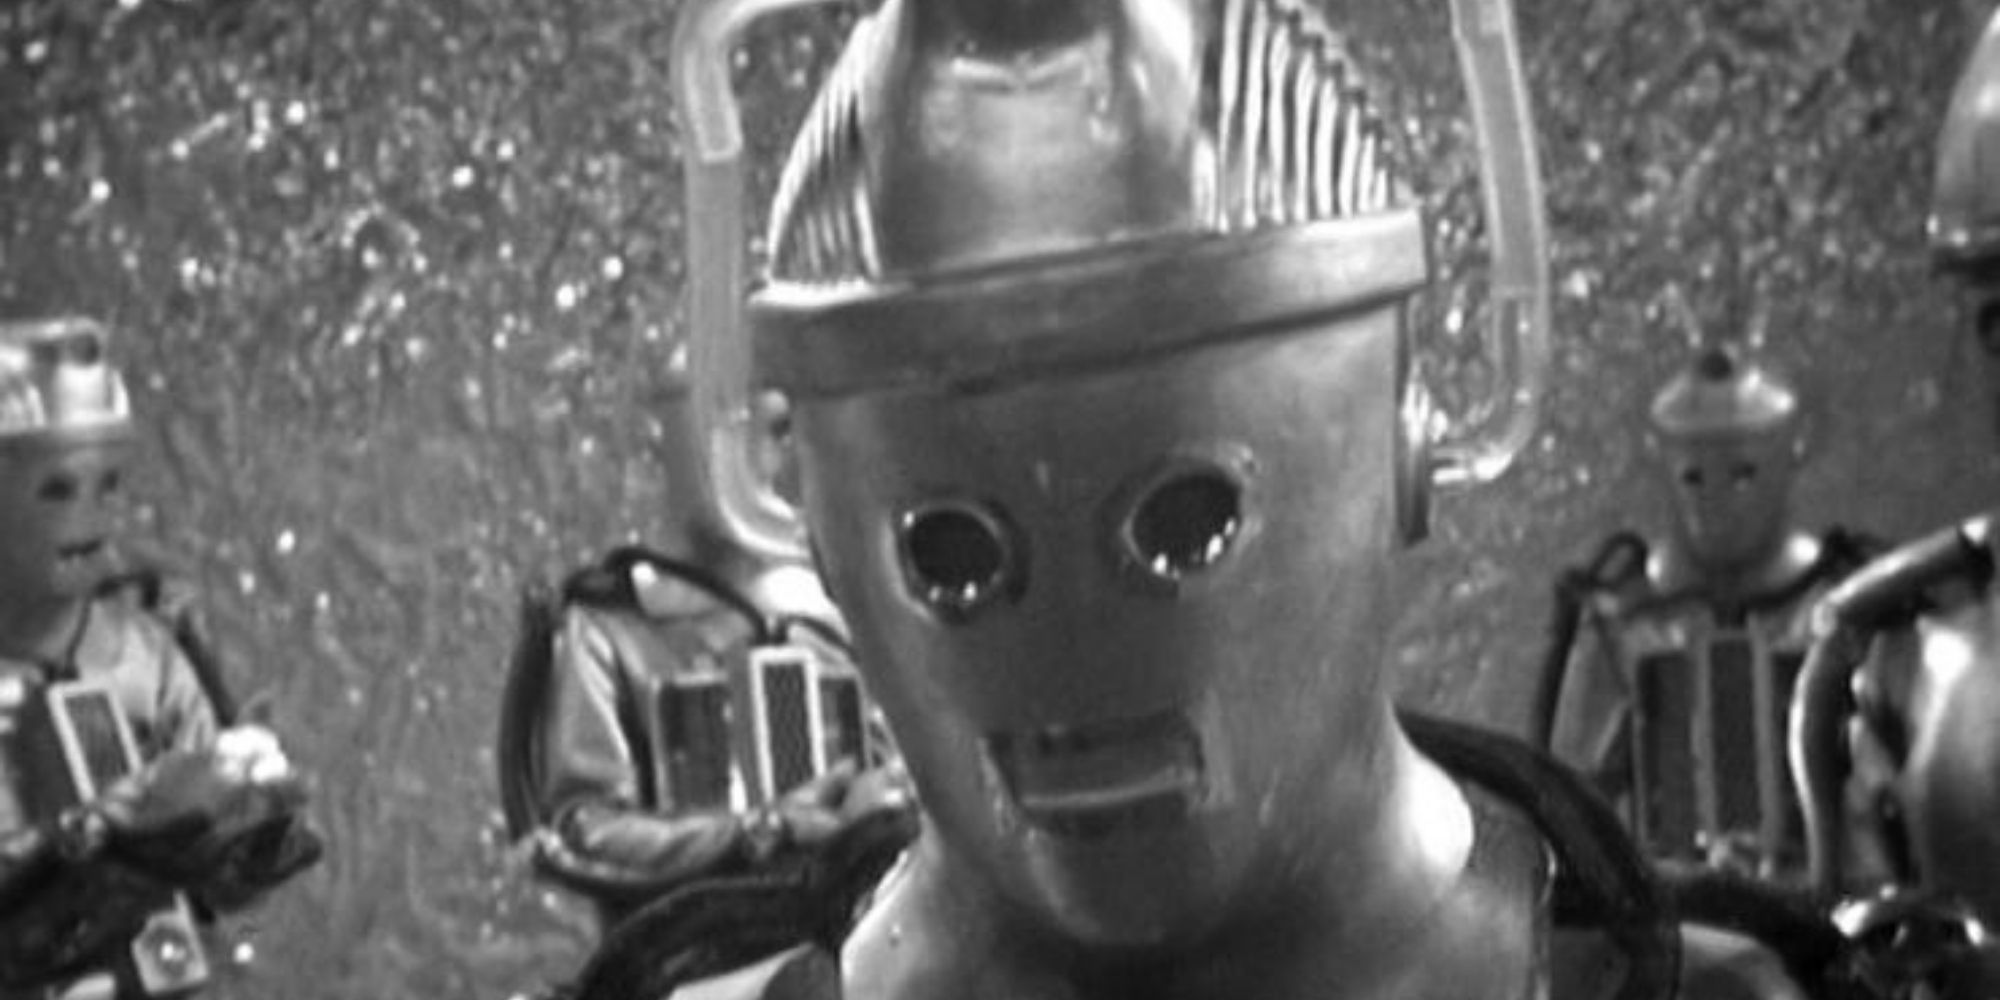 Official image of The Tomb of the Cybermen, a serial from the TV show Doctor Who.